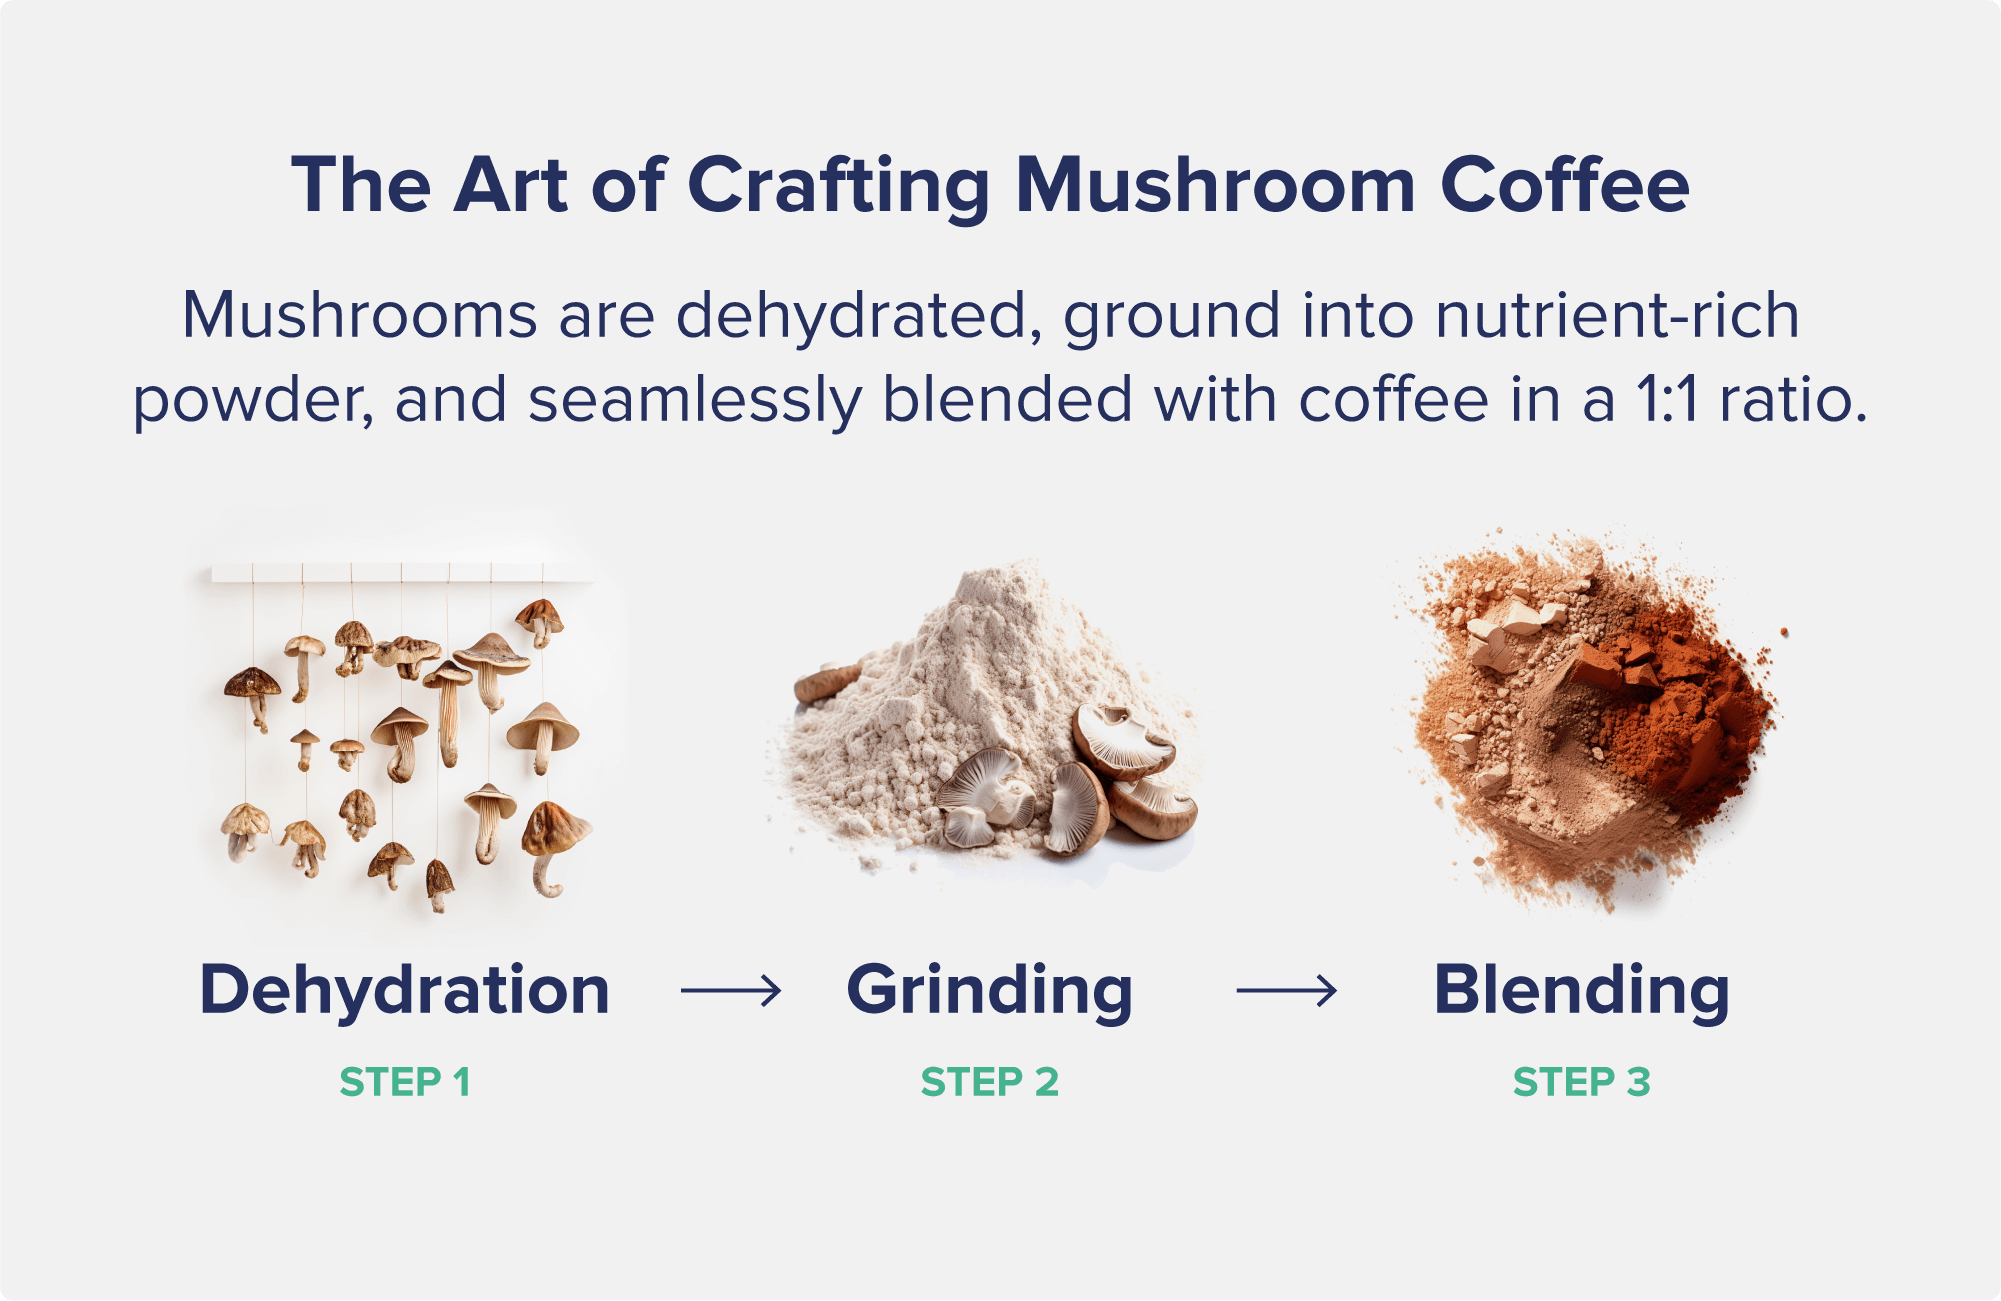 A graphic entitled "The Art of Crafting Mushroom Coffee" showing three steps with accompanying pictures - dehydration, grinding, and blending.